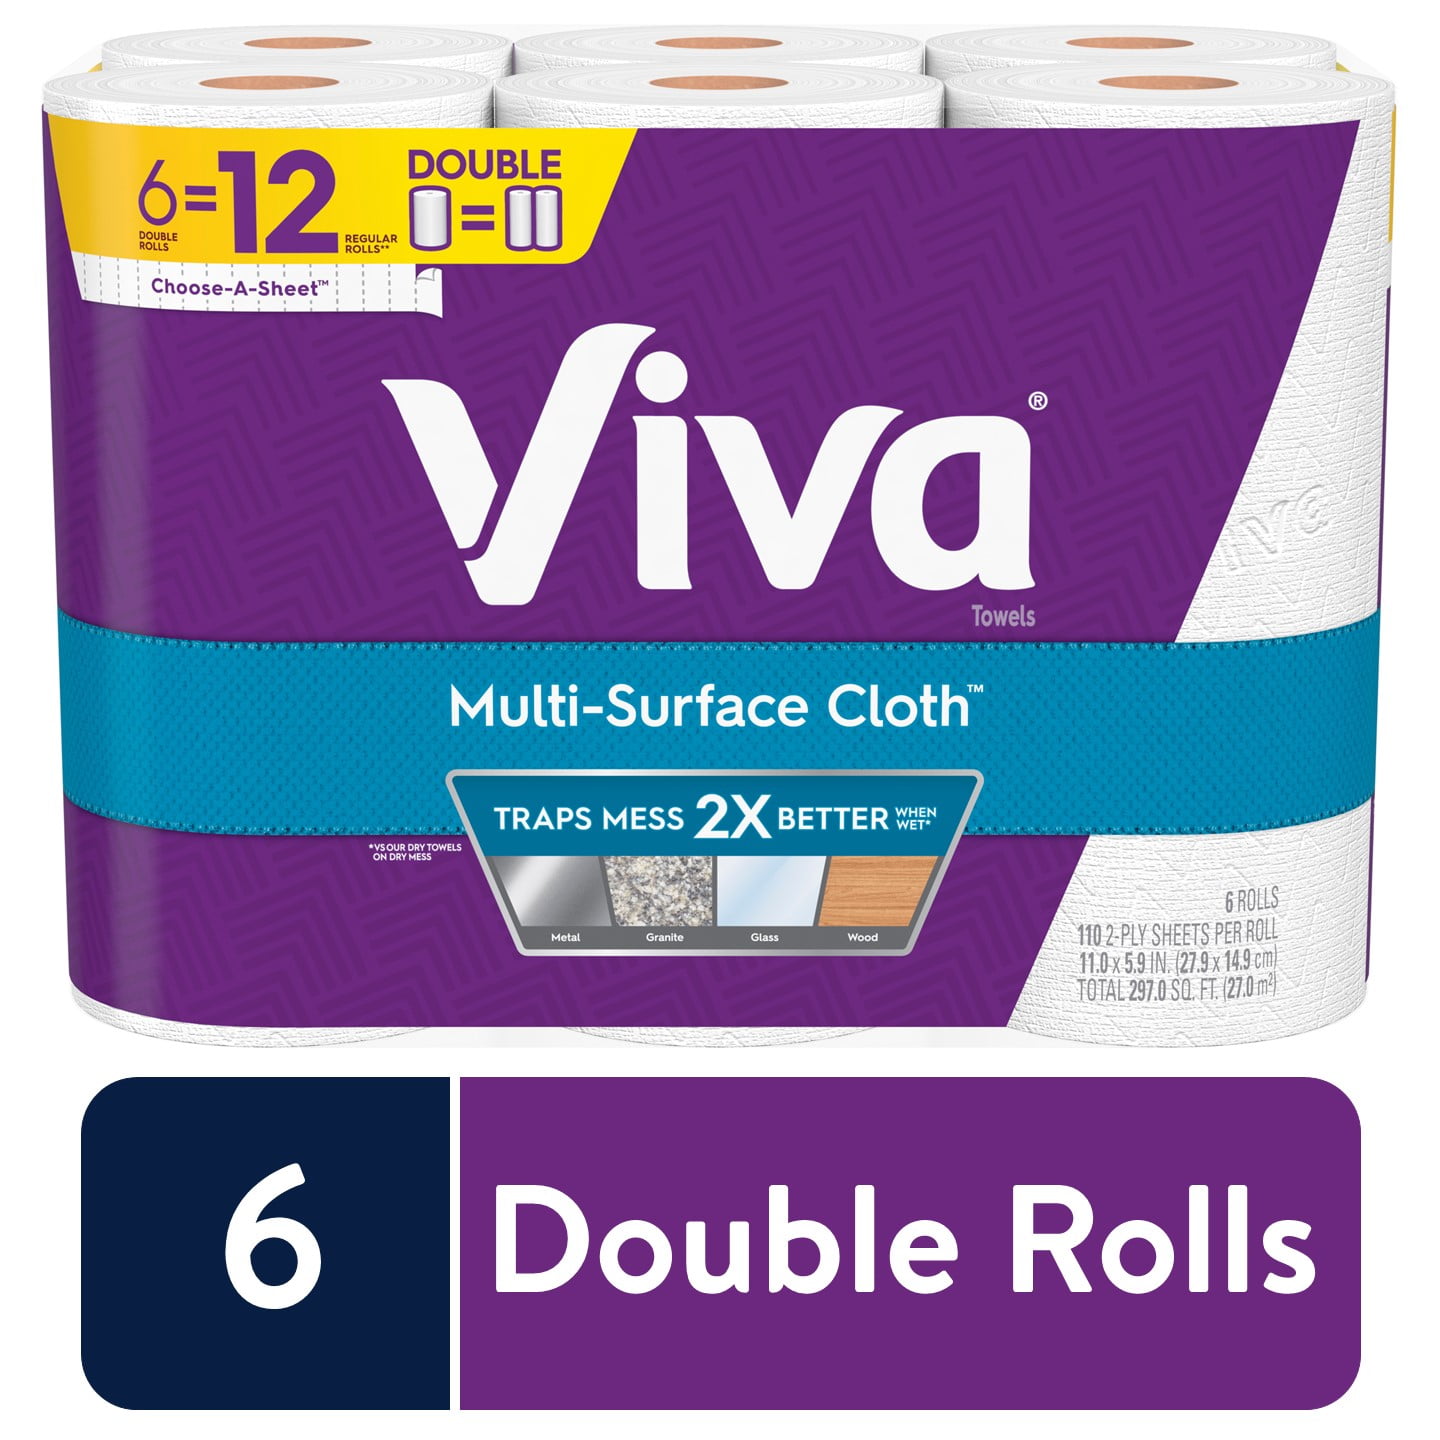 Photo 1 of {2 PACK OF 6}Viva Multi-Surface Cloth Paper Towels - Choose-A-Sheet - 12 Double Rolls NEW